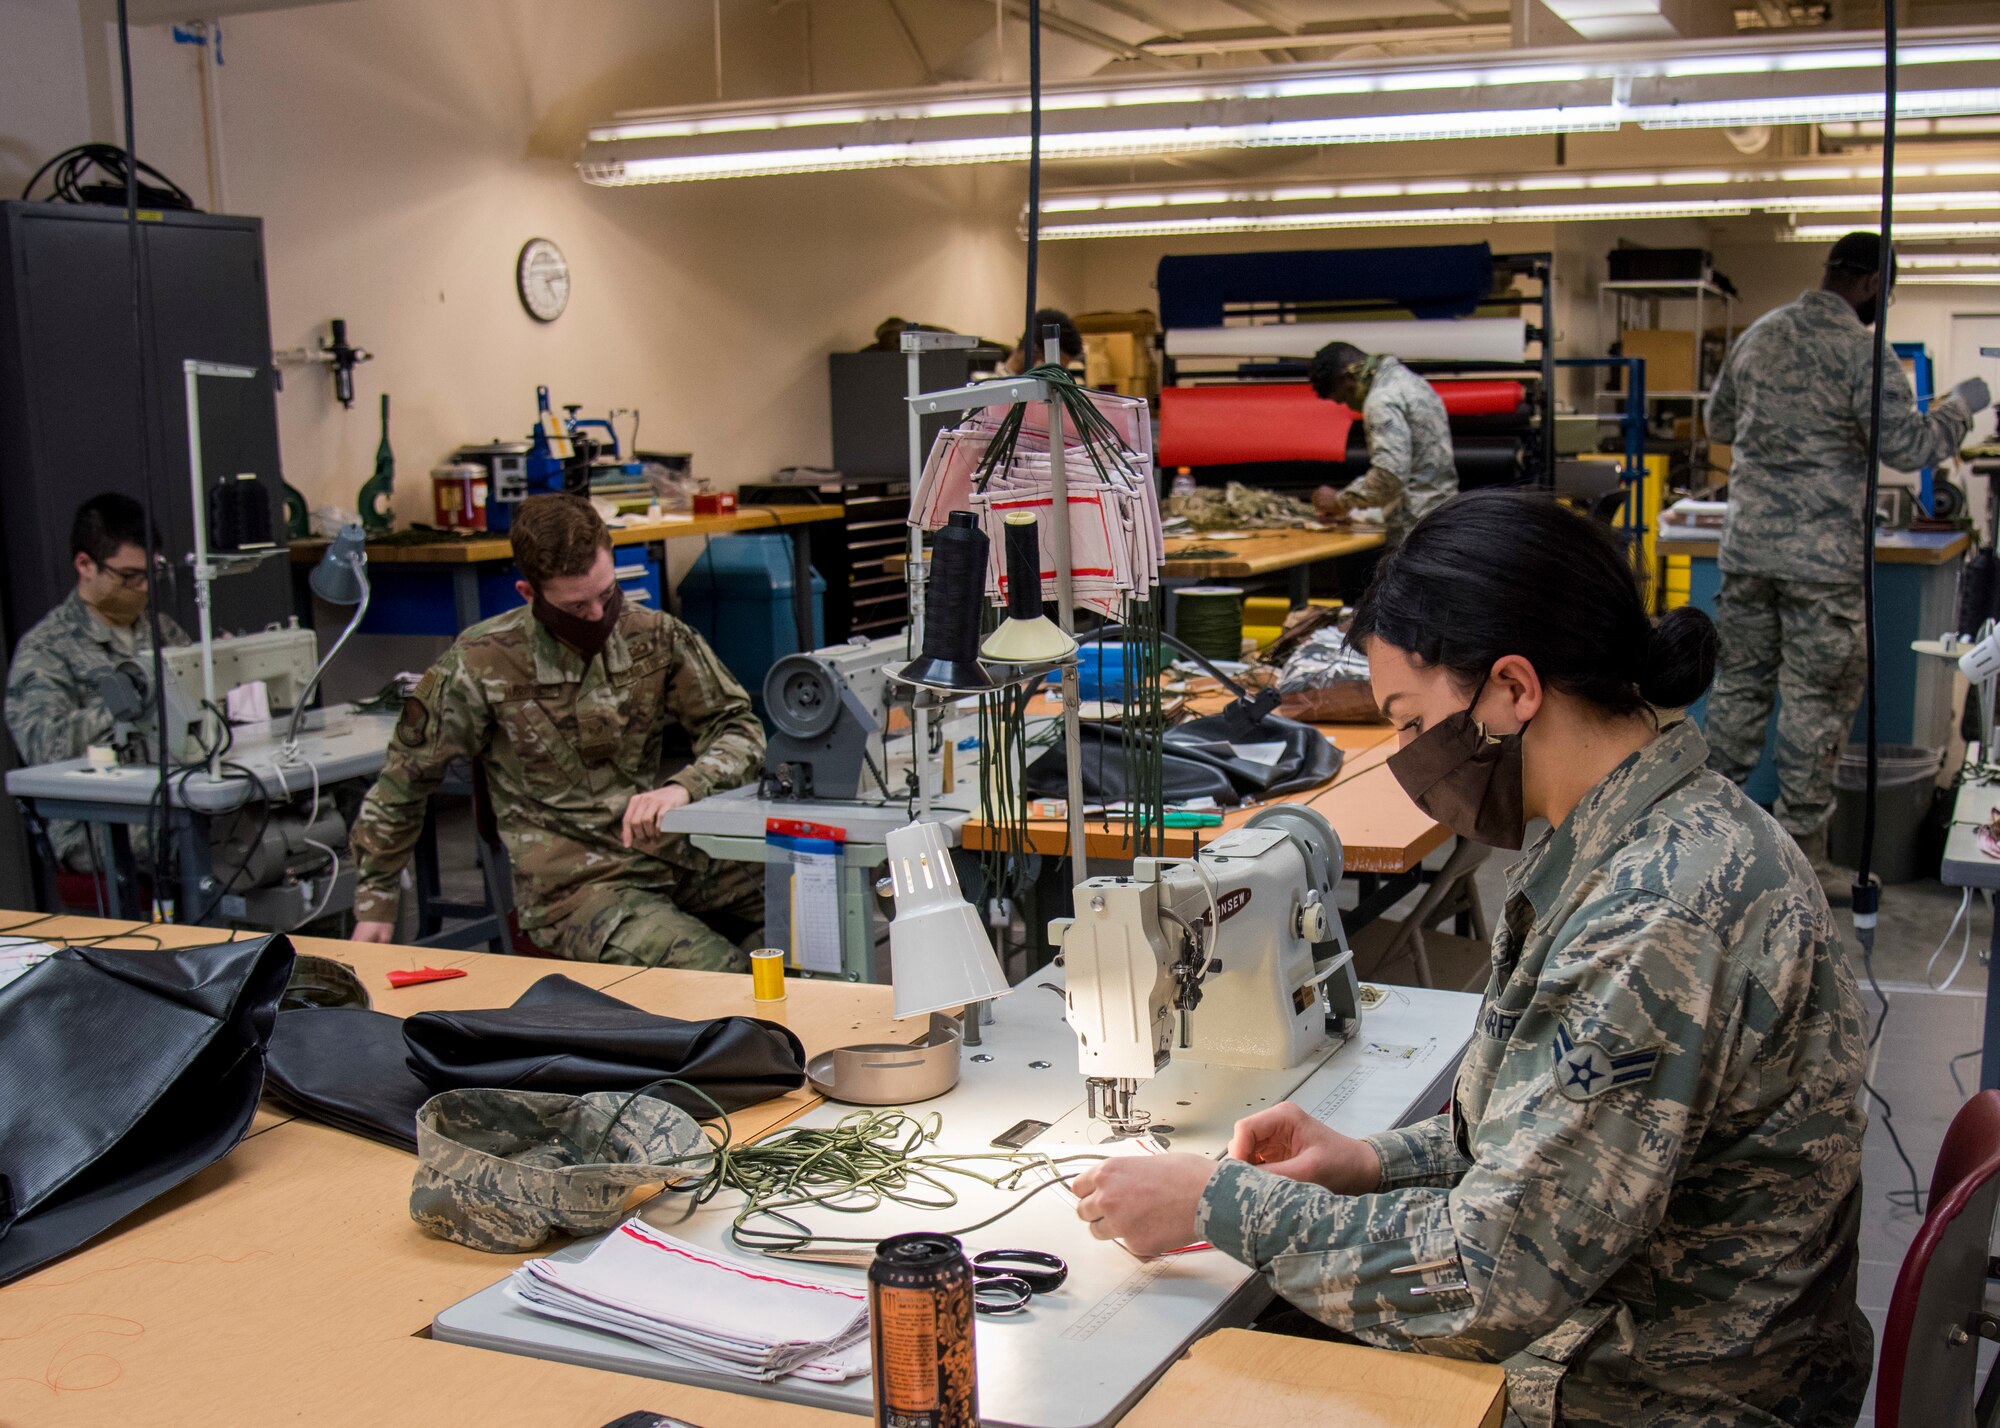 U.S. Air Force Airmen from the 92nd Operation Support Squadron Aircrew Flight Equipment unit create protective facemasks for Airmen at Fairchild Air Force Base, Washington, April 10, 2020. The task of creating protective facemasks may be outside the AFE unit’s expertise, however, their broad skill set and technical training enables them to meet this need in support of Airmen and enabling Fairchild’s mission success. (U.S. Air Force photo by Senior Airman Jesenia Landaverde)